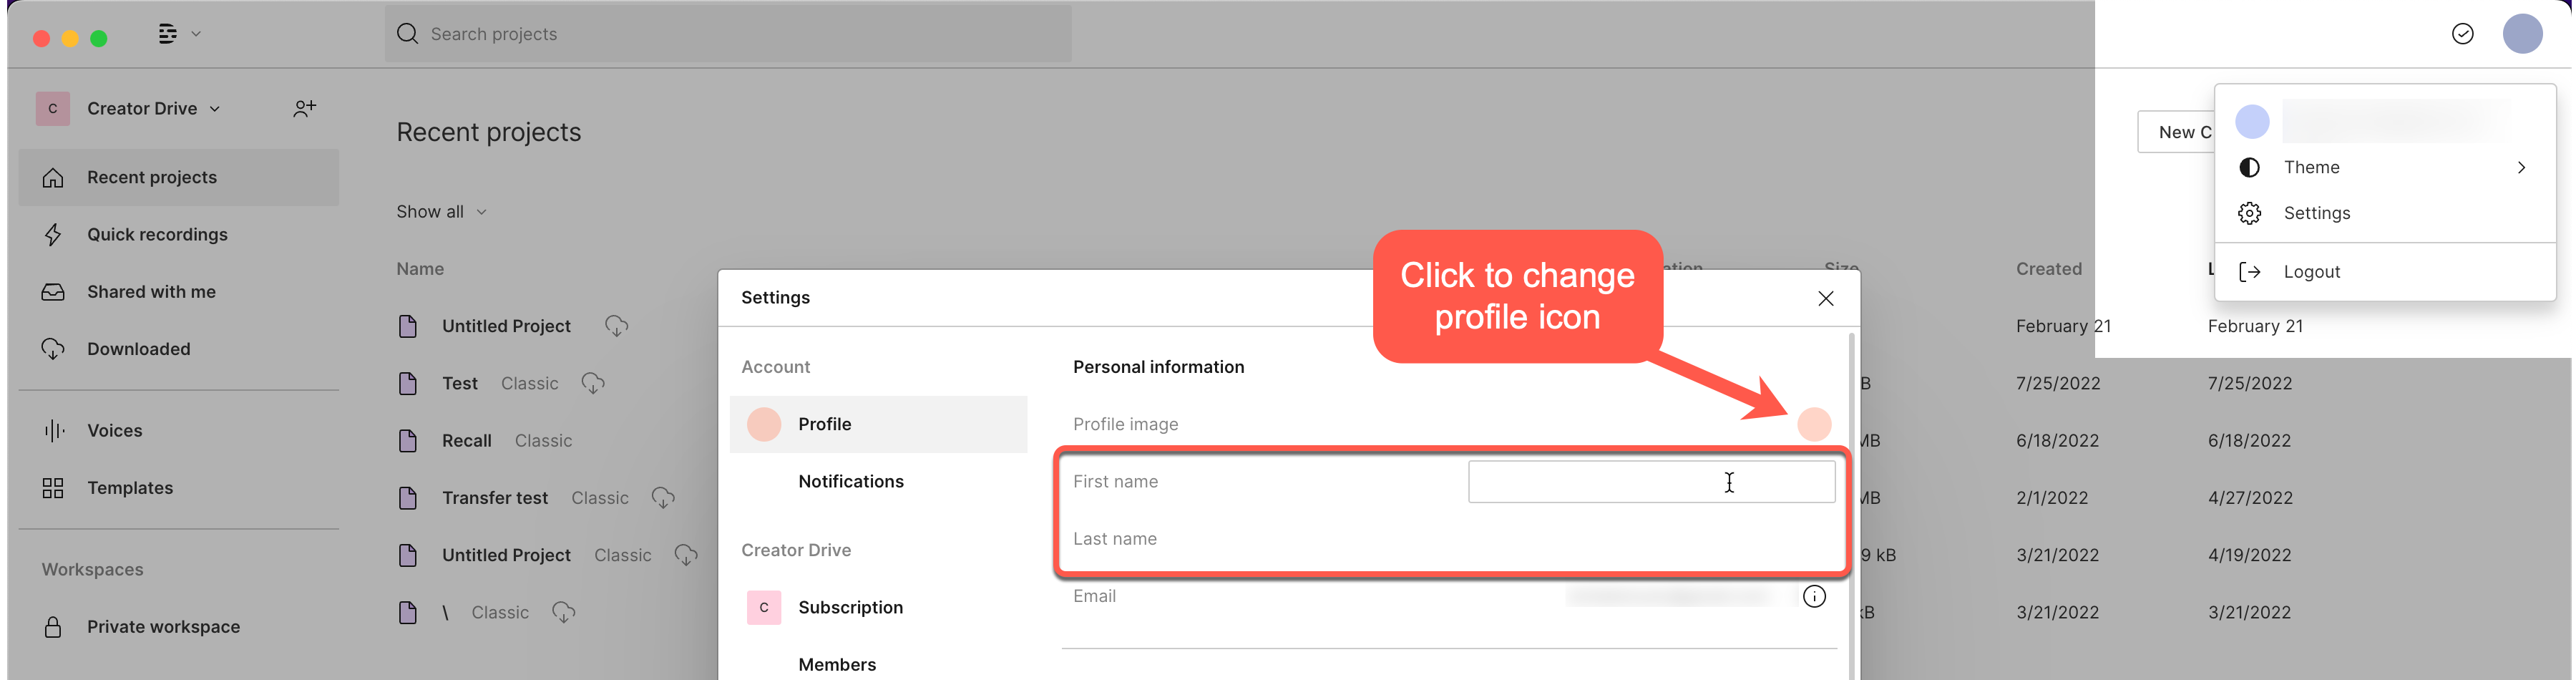 Descript app account settings panel: updating profile image and name.